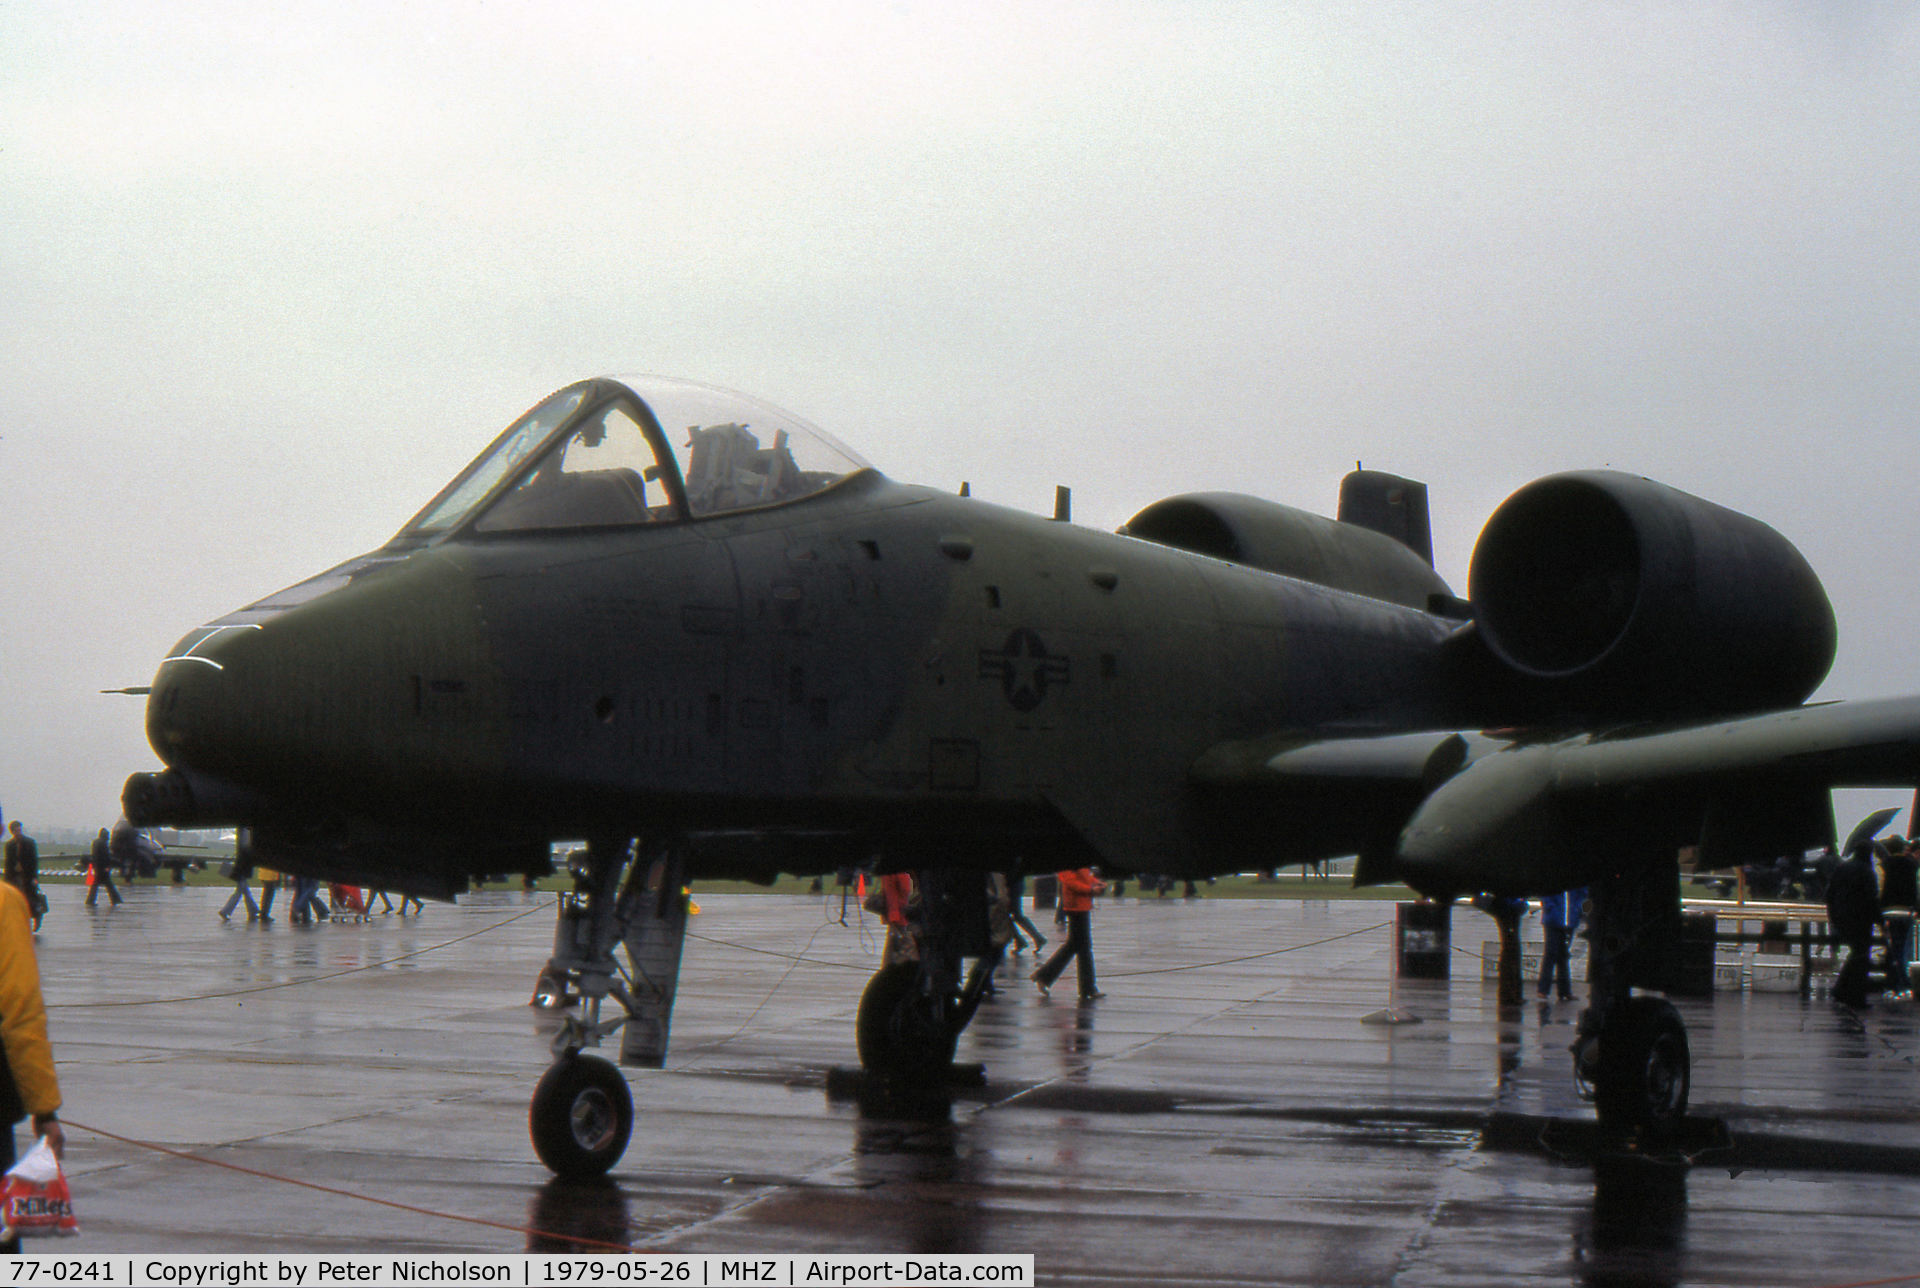 77-0241, 1977 Fairchild Republic A-10A Thunderbolt II C/N A10-0166, A-10A Thunderbolt II of the 81st Tactical Fighter Wing on display at the 1979 RAF Mildenhall Air Fete.